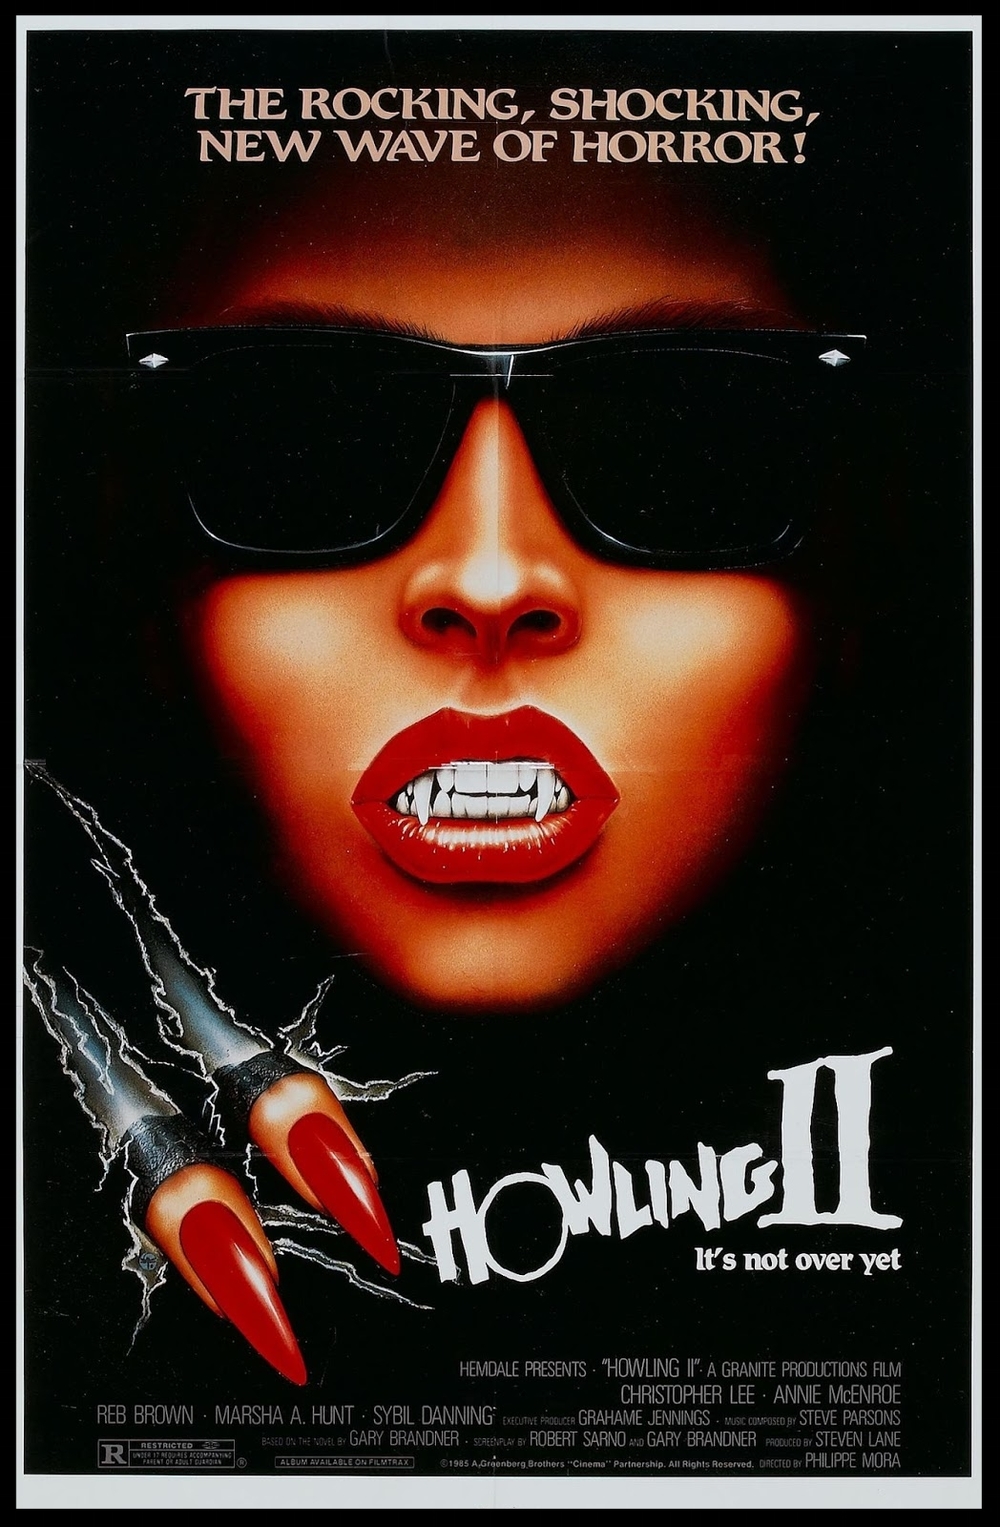 Woman with long canines carves two fingers through the black cover. Howling II written in white underneath.